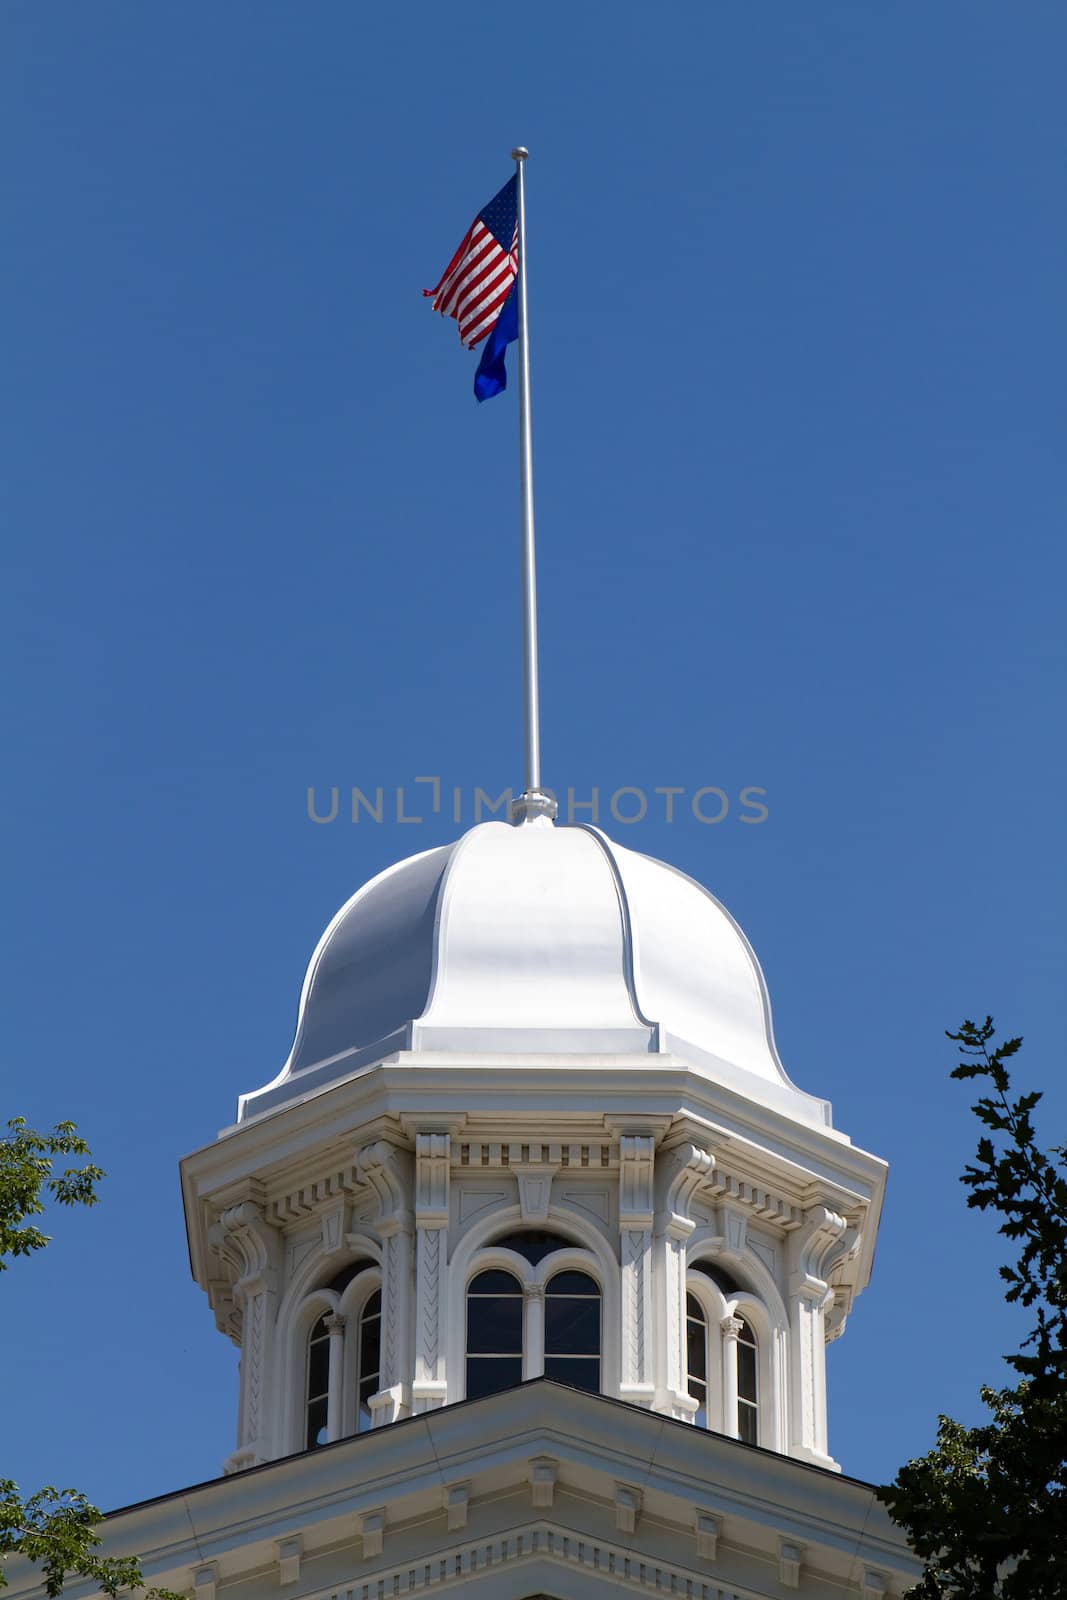 Nevada state capitol dome located in Carson City, NV against a blue sky background with flags flying on top.